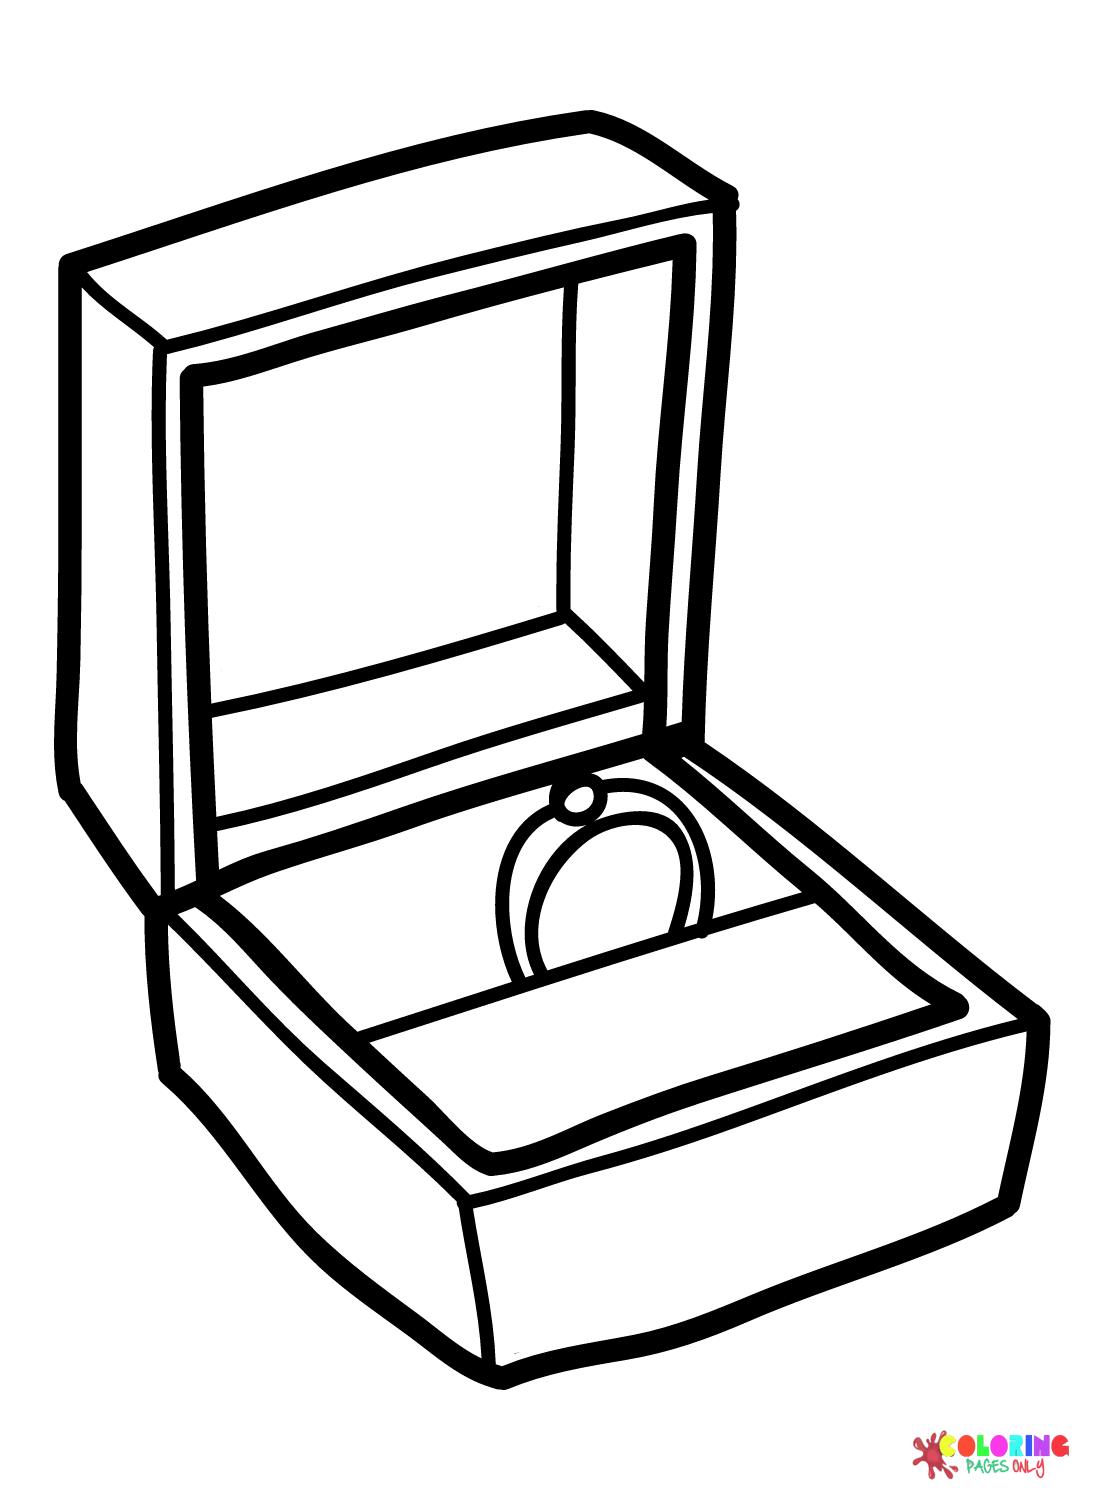 Wedding Ring with Box Coloring Page - Free Printable Coloring Pages